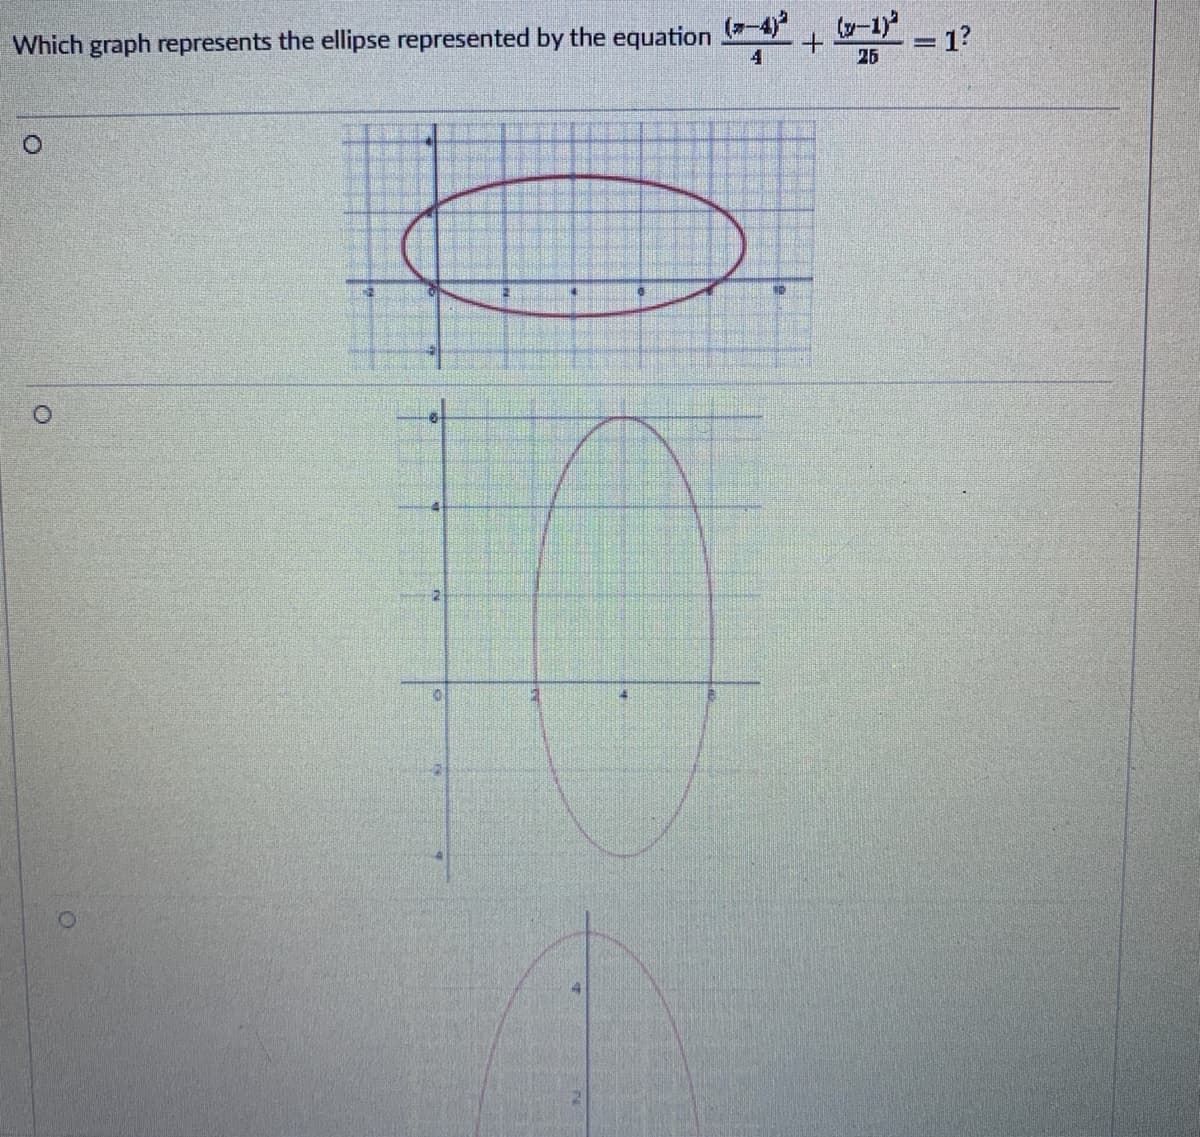 Which graph represents the ellipse represented by the equation
(7-4)
(y-1)
= 1?
4
26
